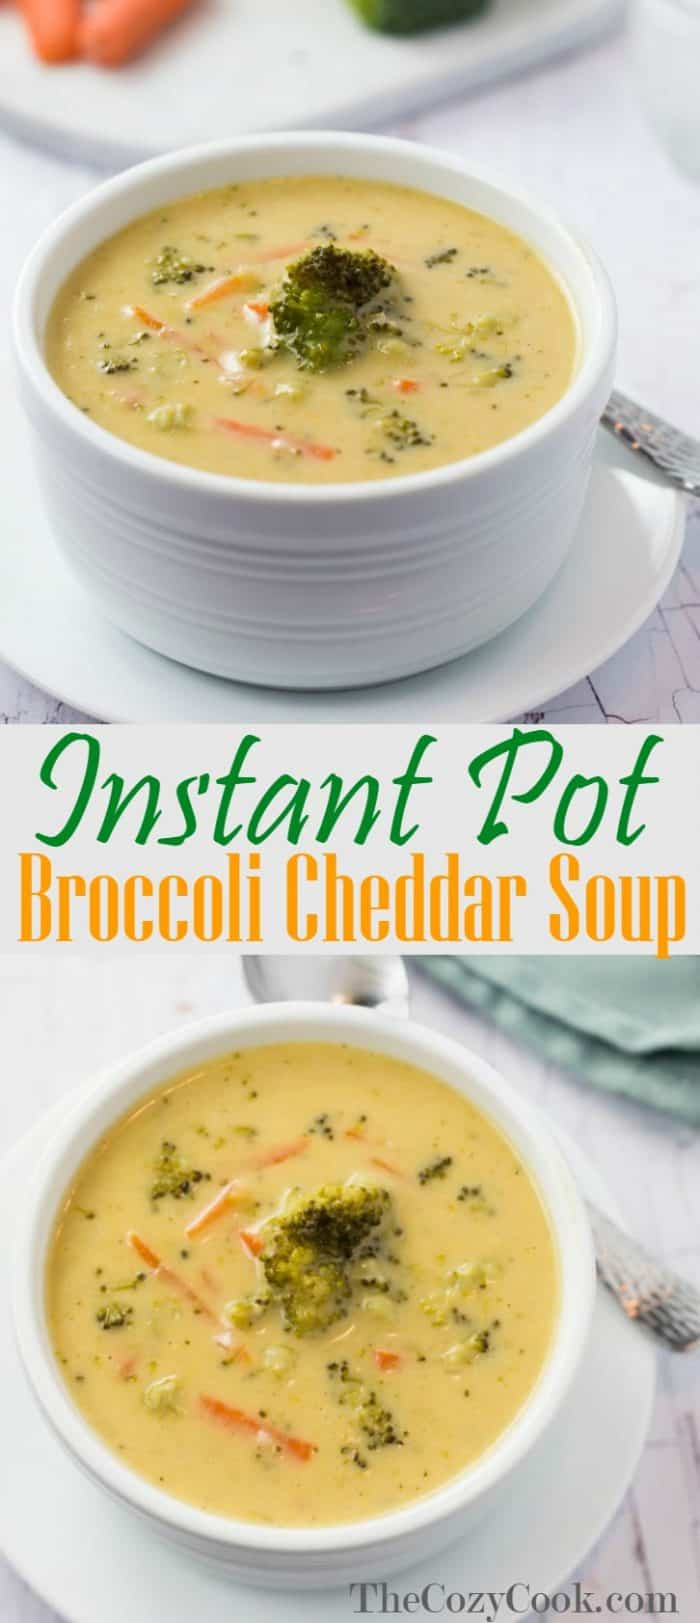 Instant Pot Broccoli Soup
 Instant Pot Broccoli Cheddar Soup The Cozy Cook